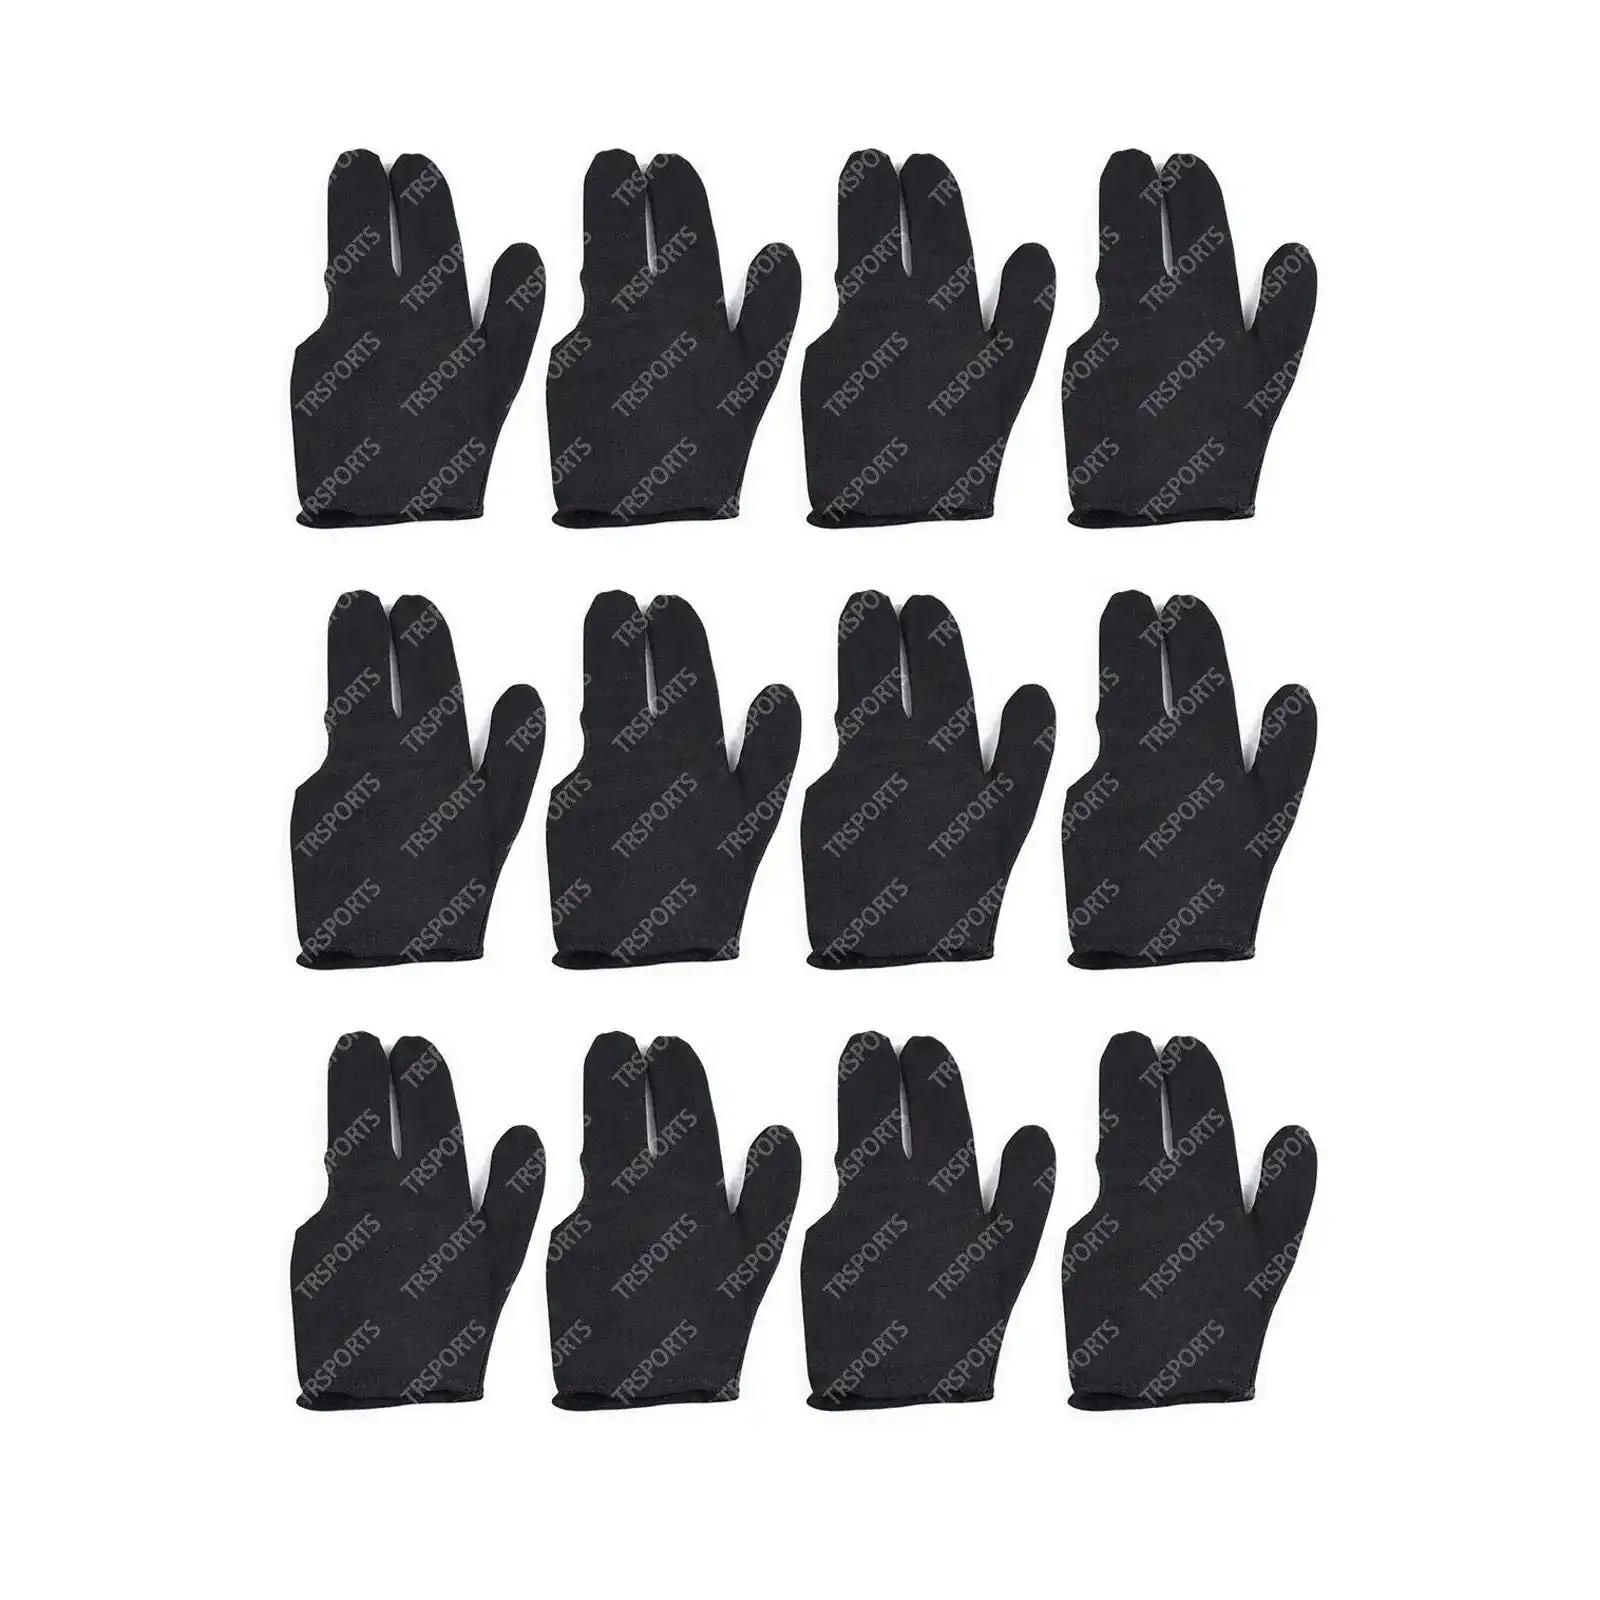 MACE Pool Billiards Snooker Glove Gloves Suit for Left / Right Hand - 12 PCS